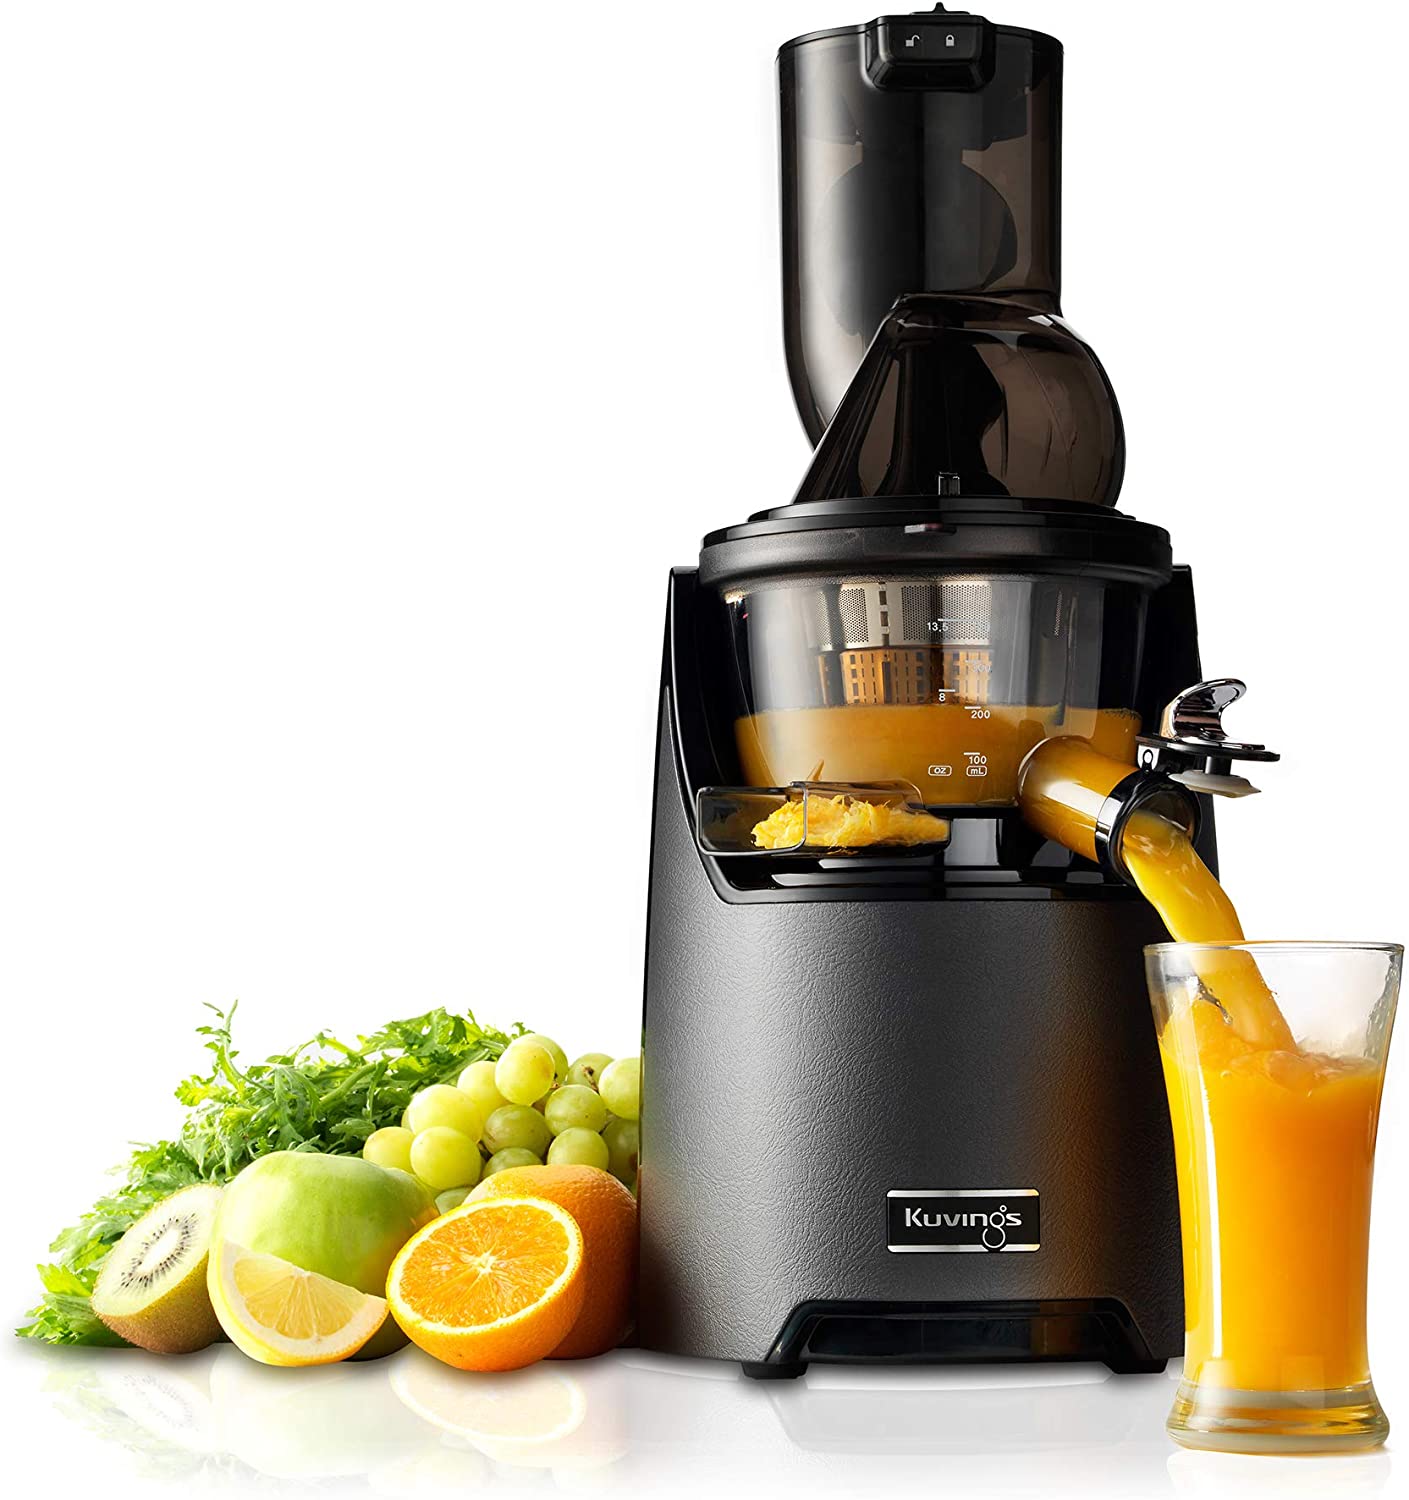 Kuvings Whole Slow Juicer EVO820GM - Higher Nutrients and Vitamins